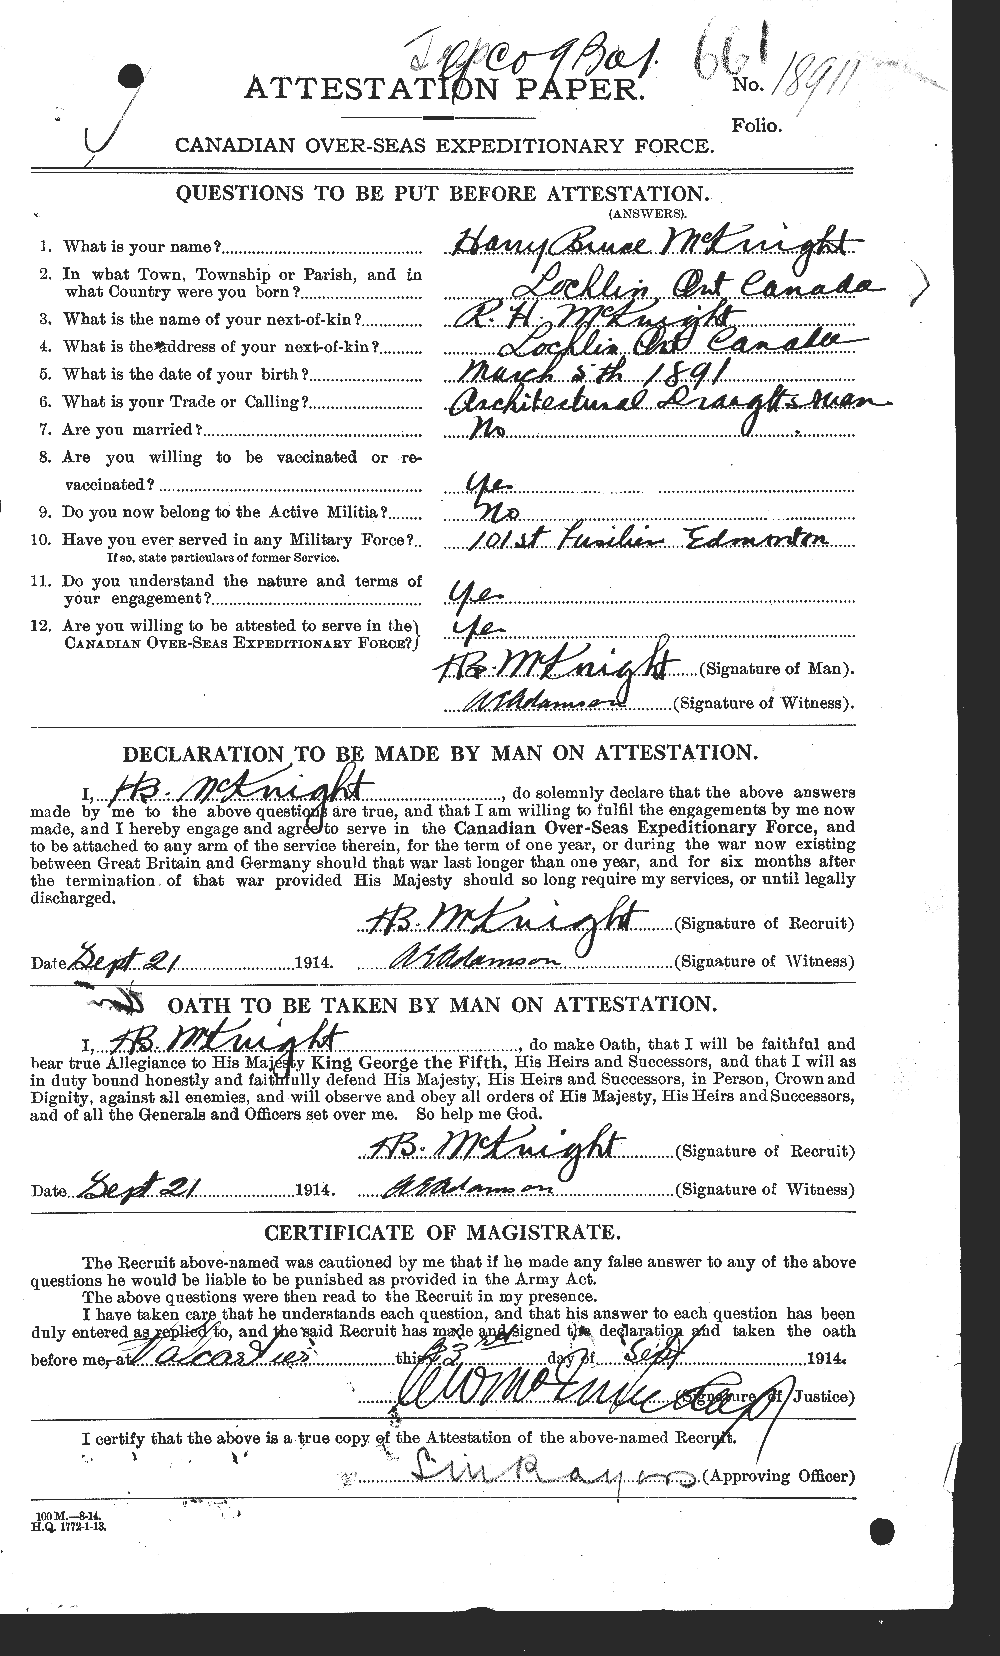 Personnel Records of the First World War - CEF 530719a